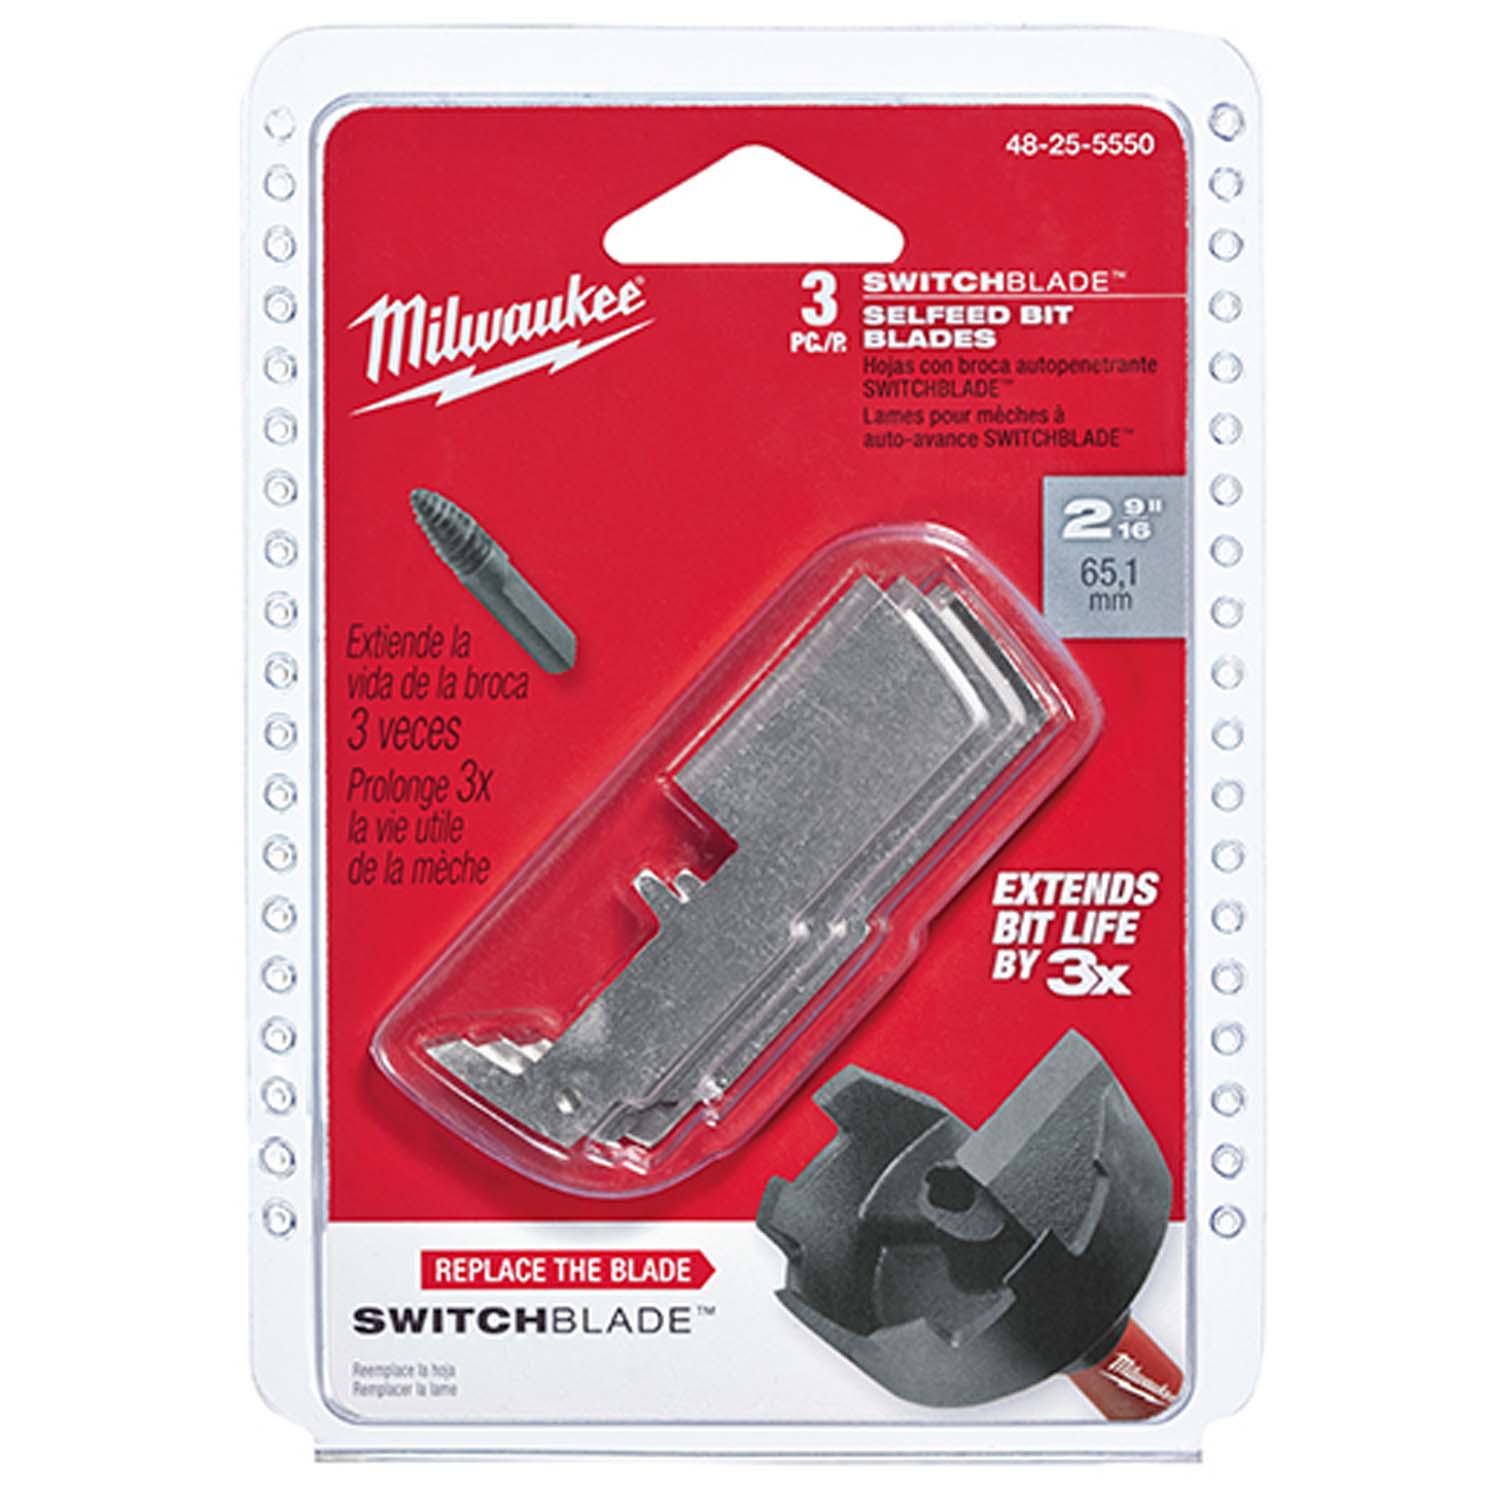 2-1/8 in. SwitchBlade™ Replacement Blades 3PK Image